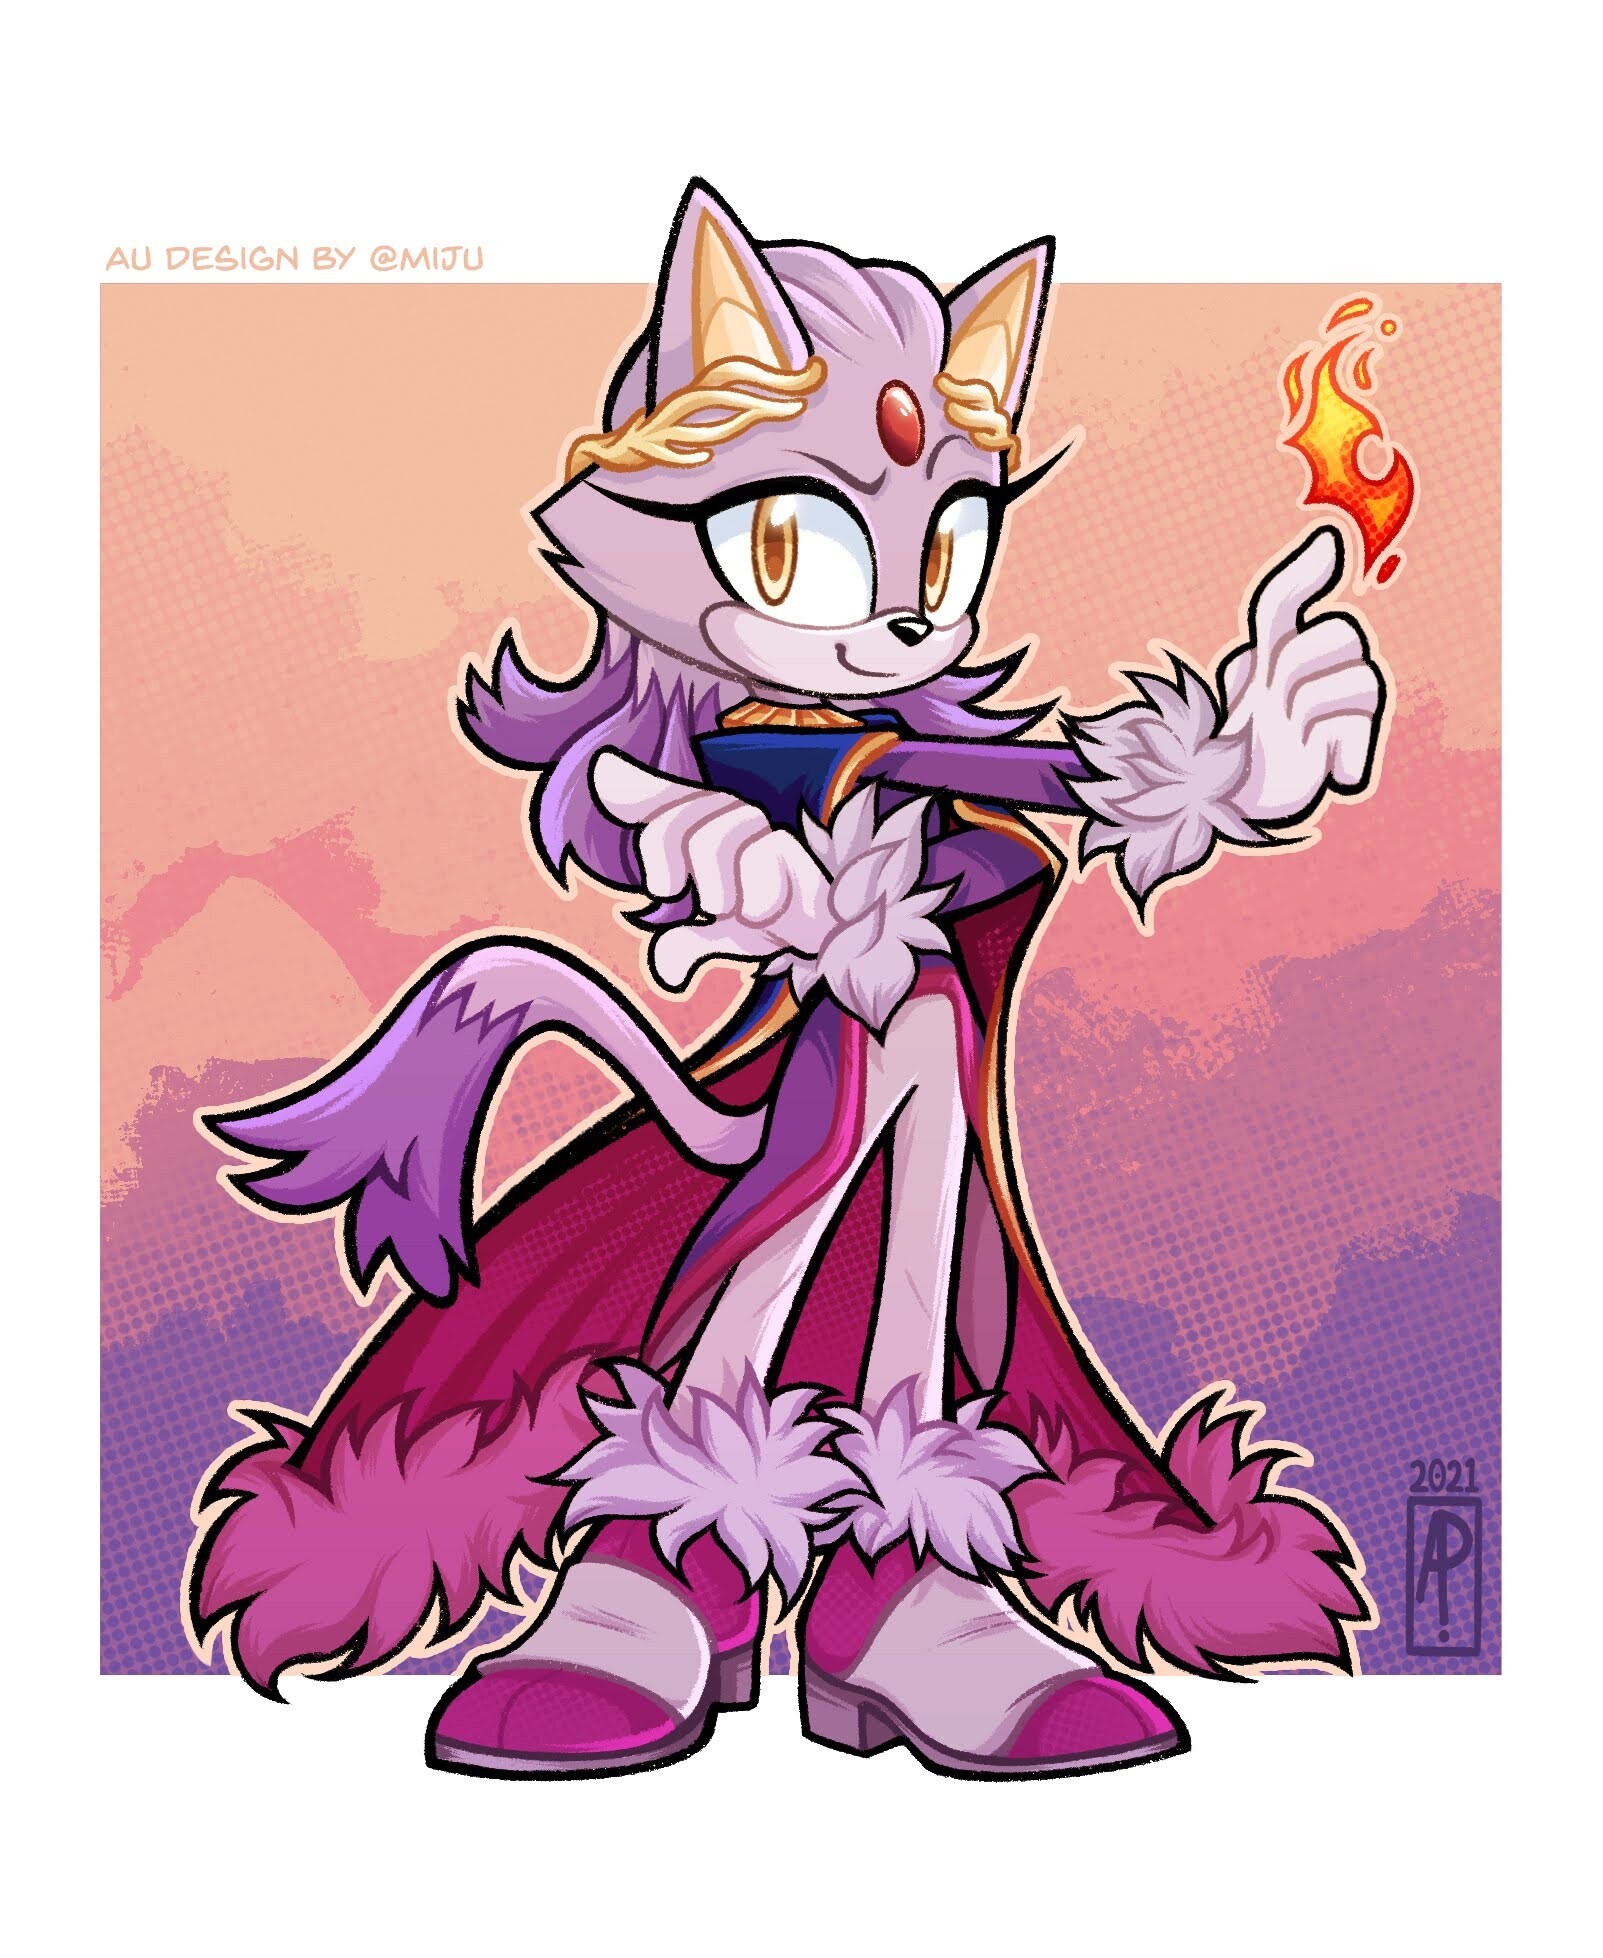 Blaze ✨ The other day I saw the Queen Blaze concept design by the AMAZING @...